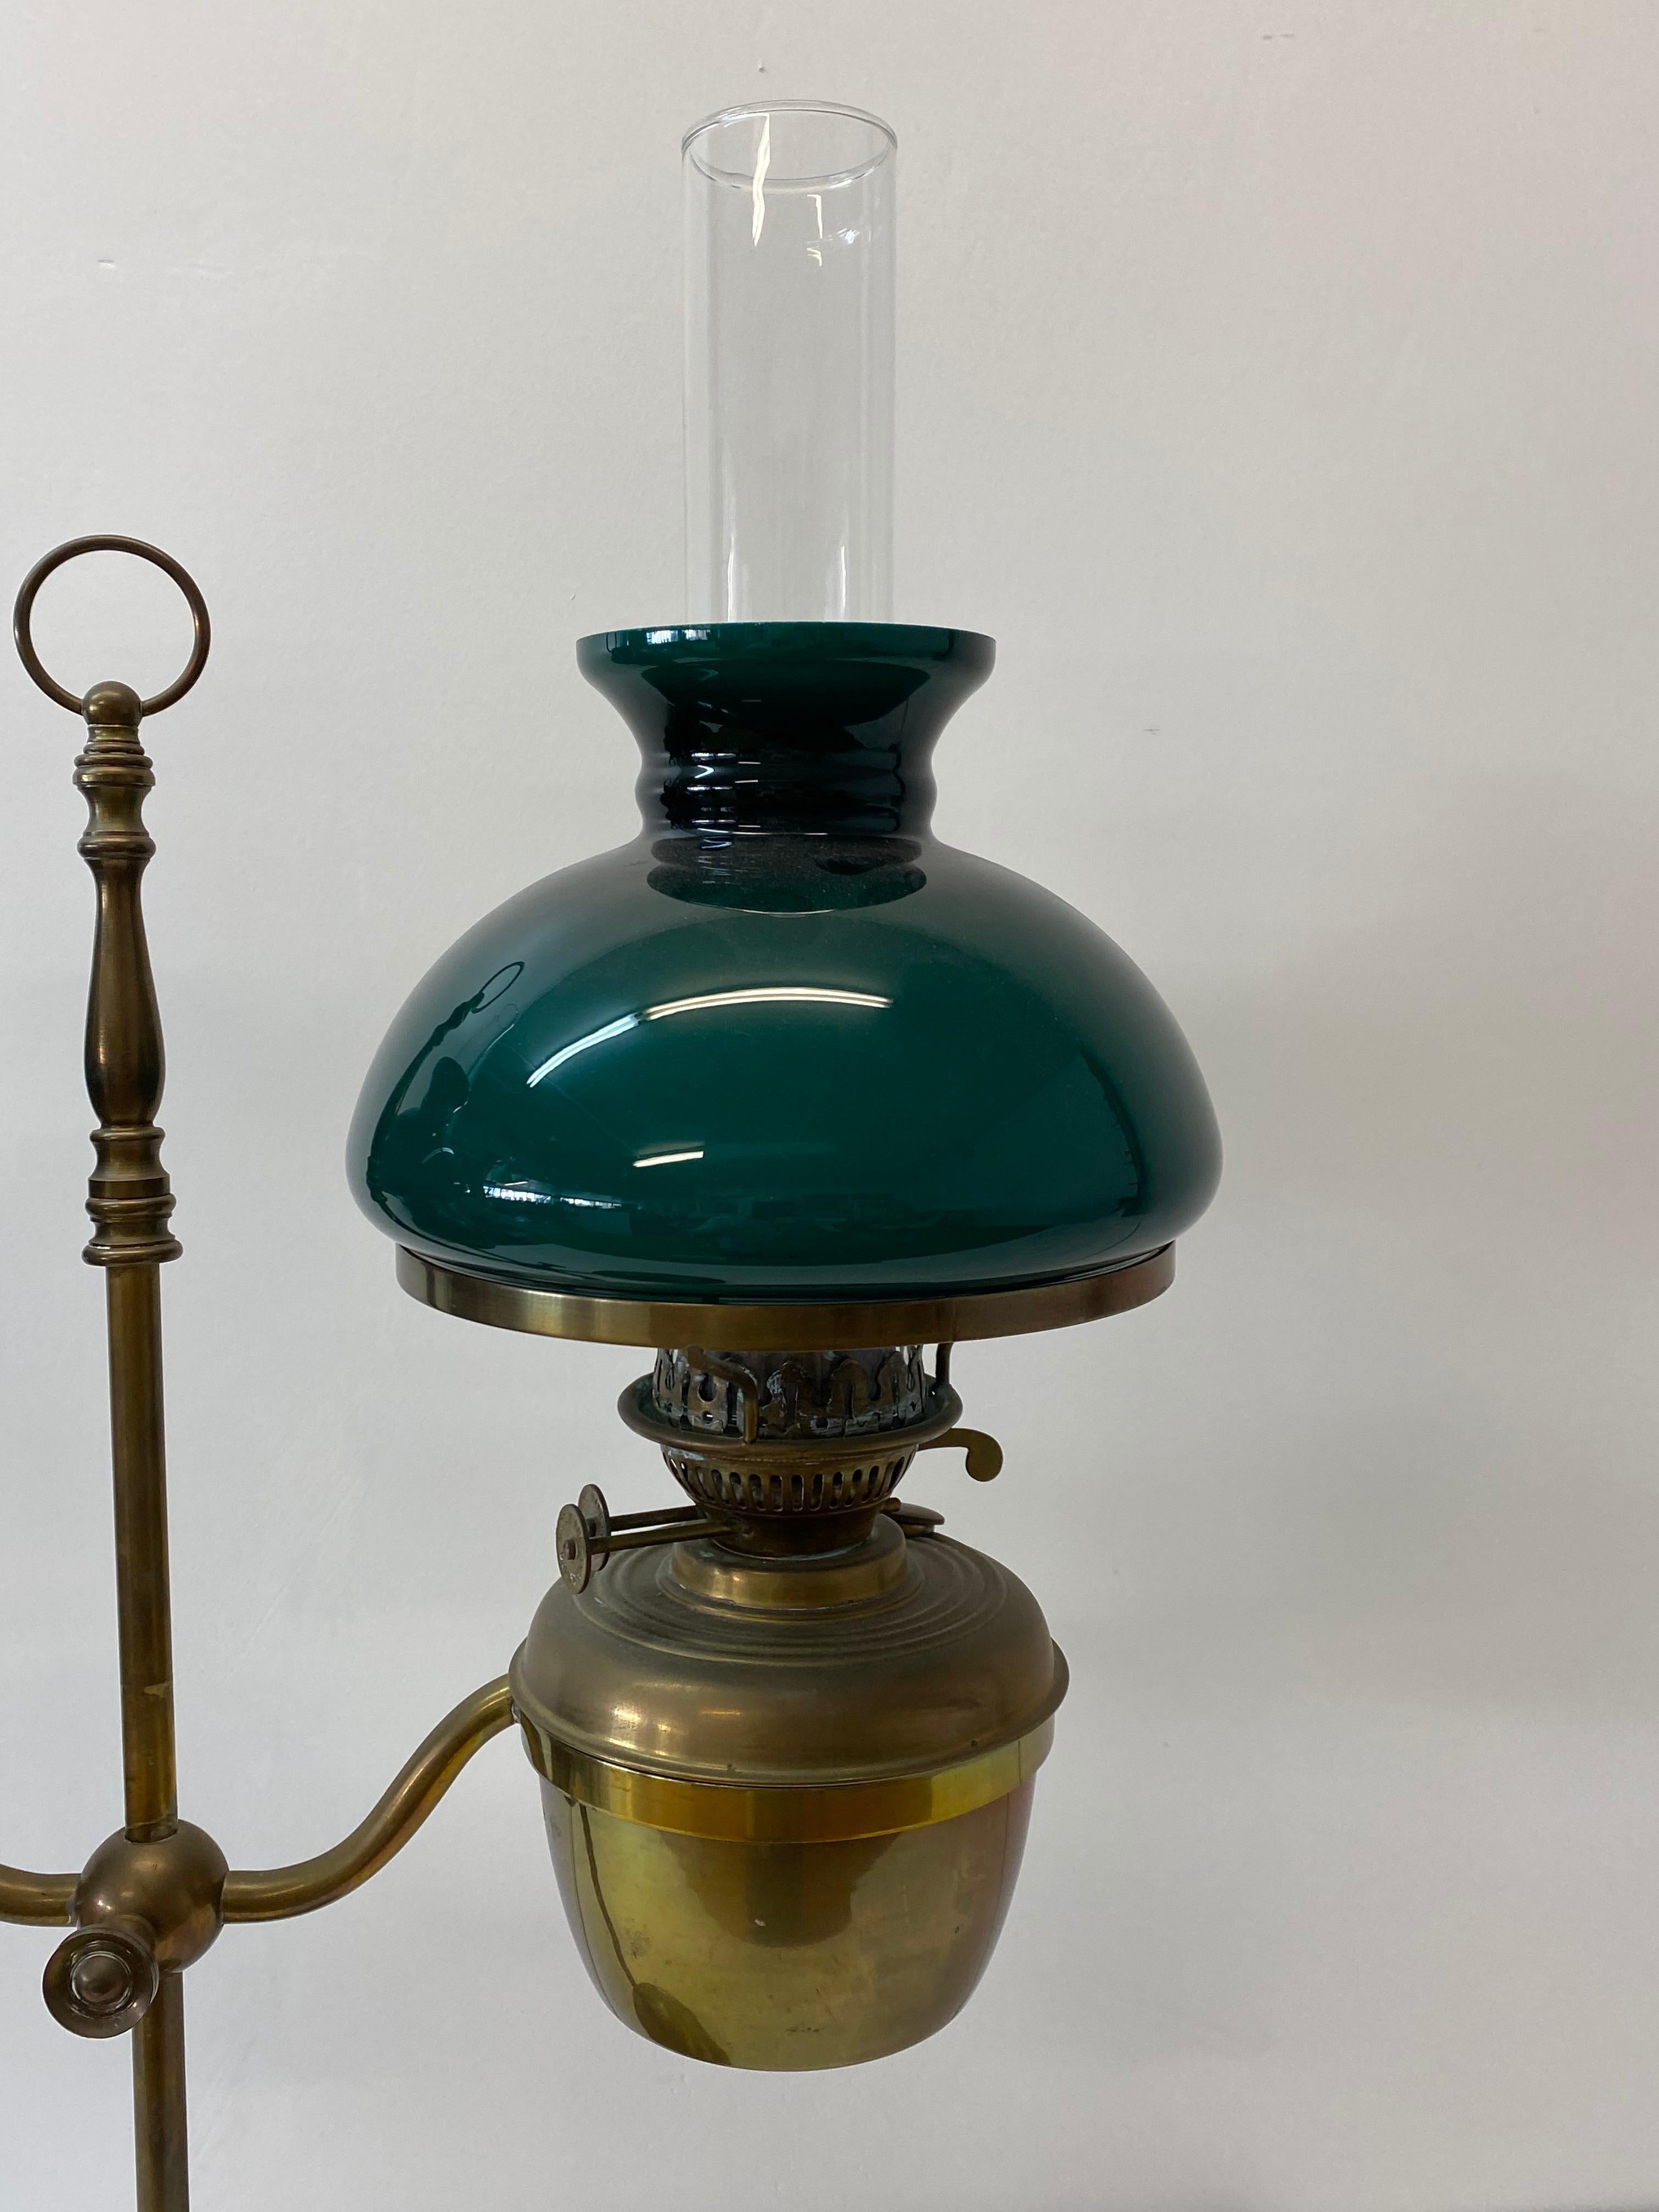 duplex oil lamp made in england